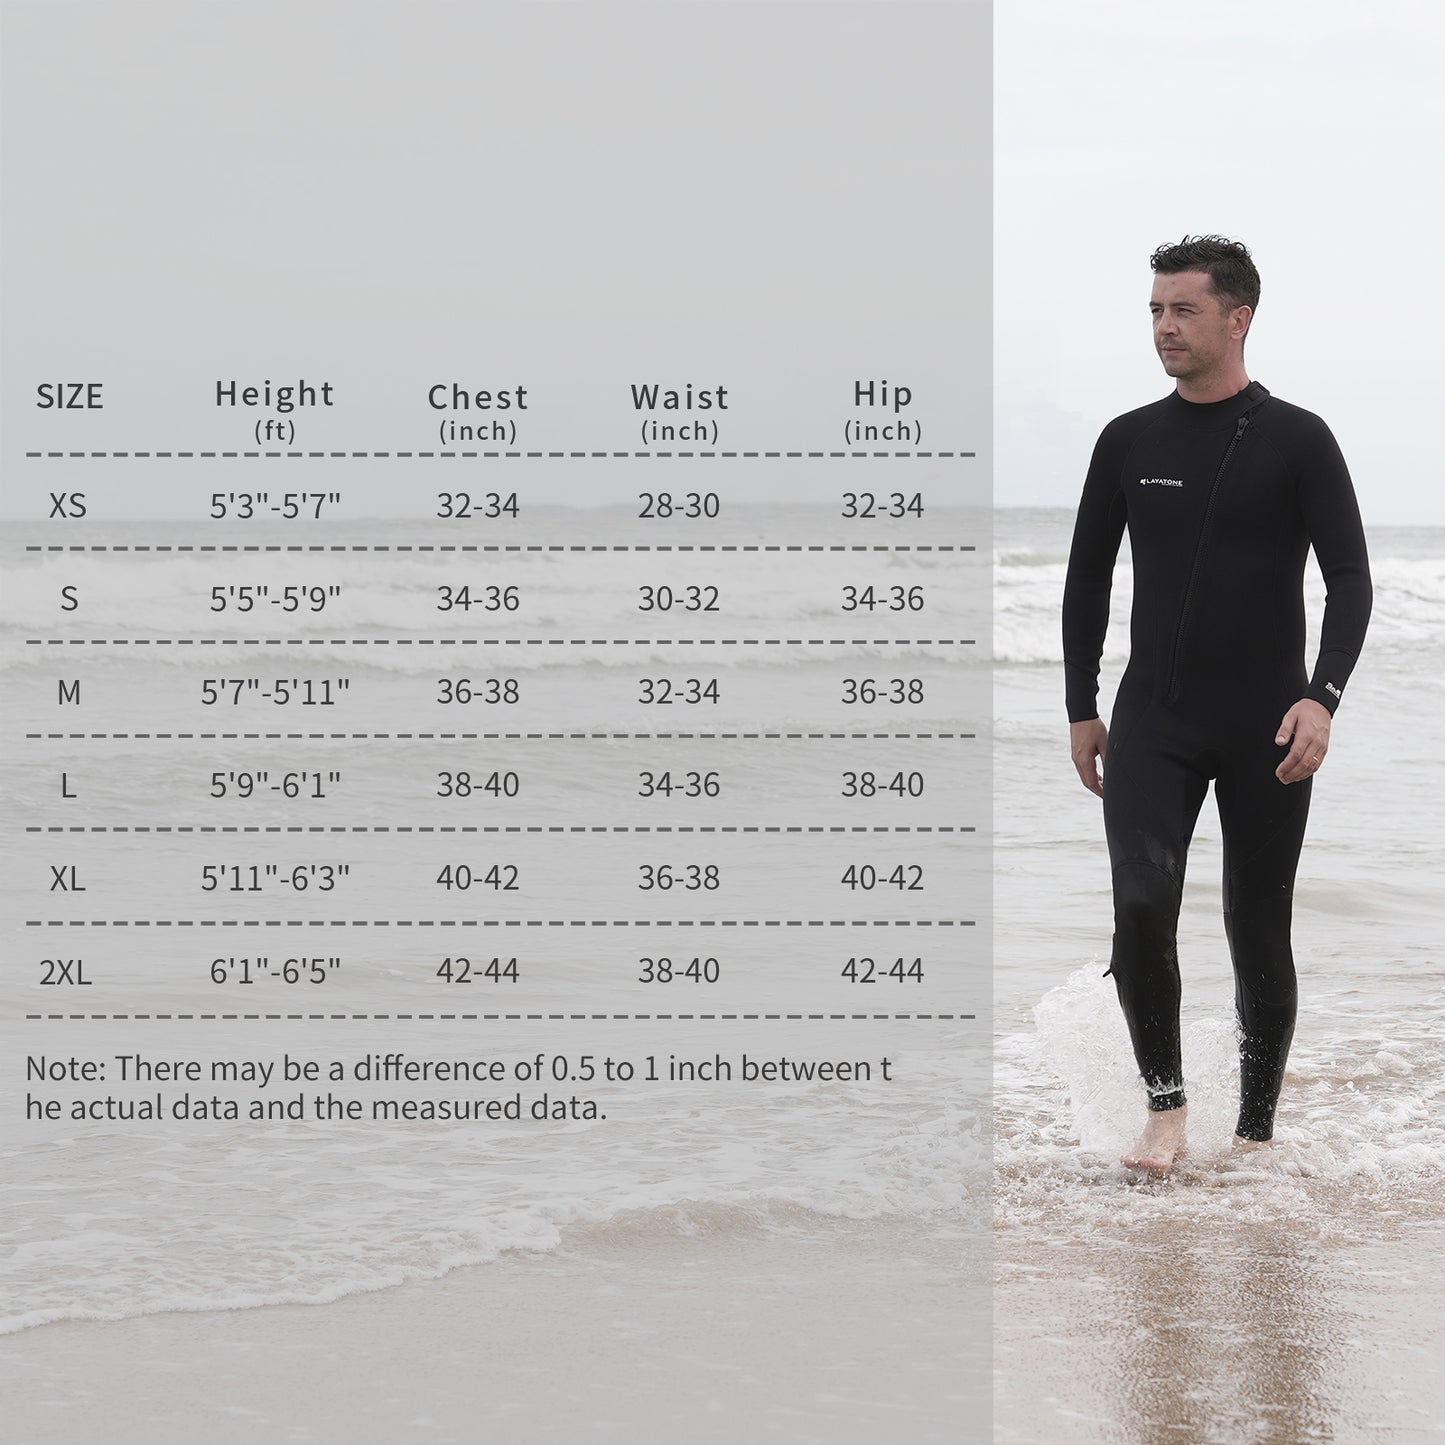 LayaTone Wetsuits for Men Wetsuit Women, 3mm Neoprene Wetsuit Full Body Front Zipper Wet Suits for Diving Snorkeling Surfing Swimming in Cold Water